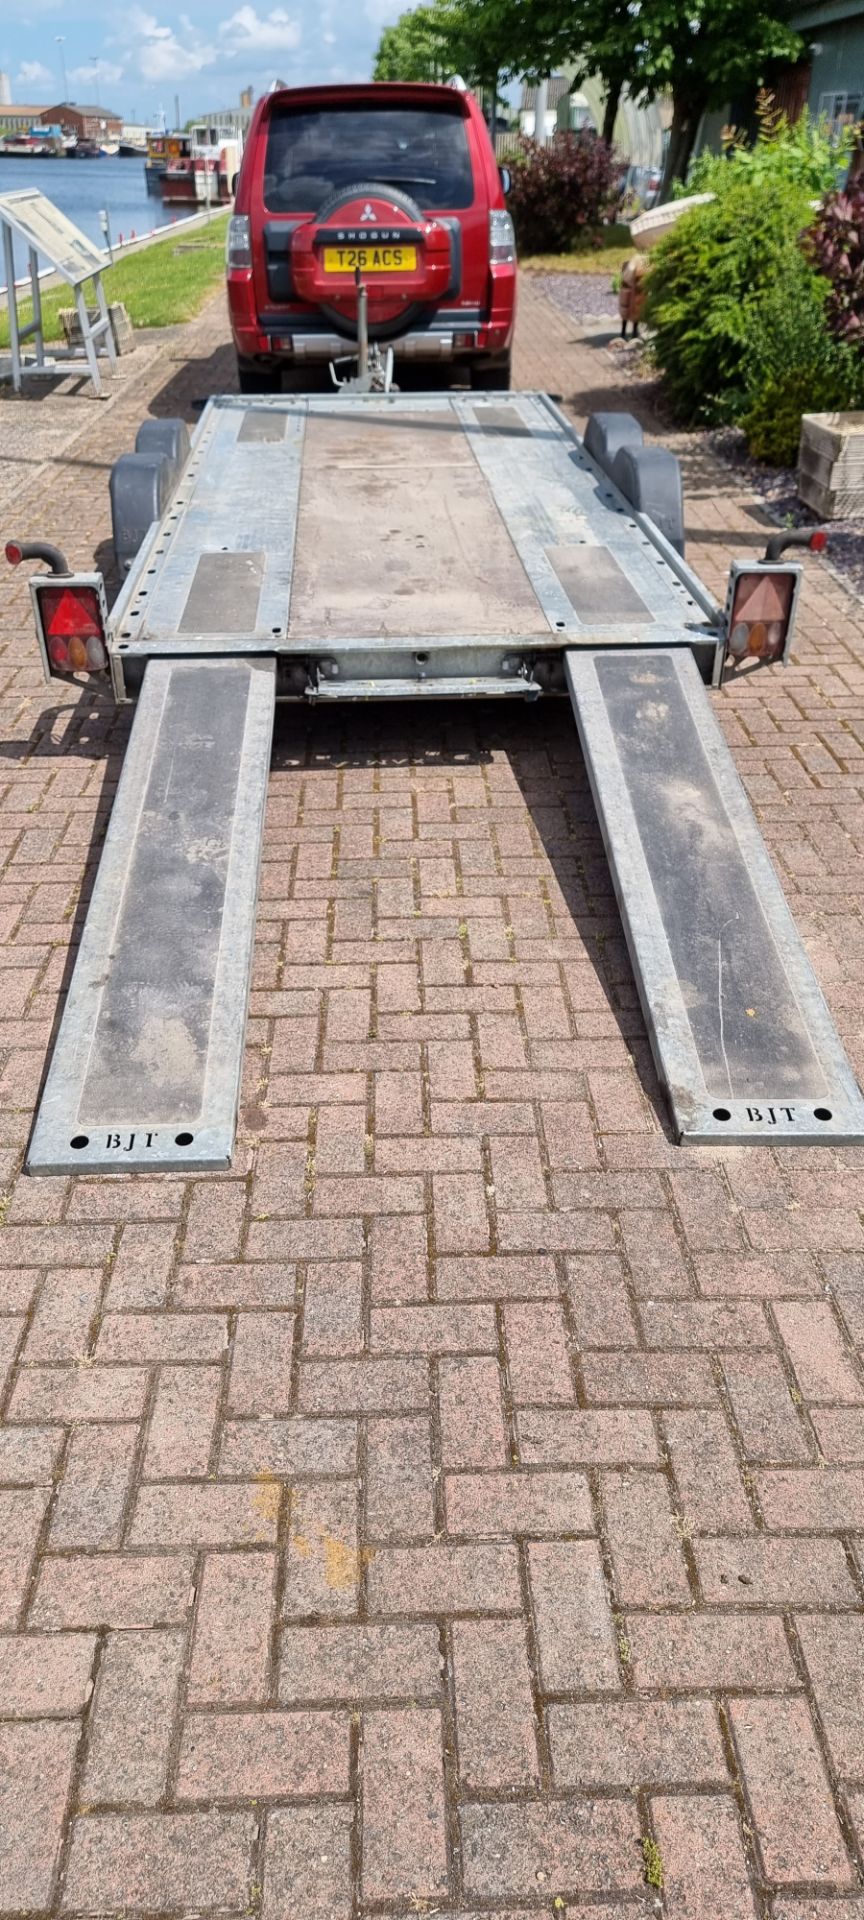 A Brian James twin axel car trailer, 1600kg load, with pull out ramps and locking tow hitch with - Image 3 of 7